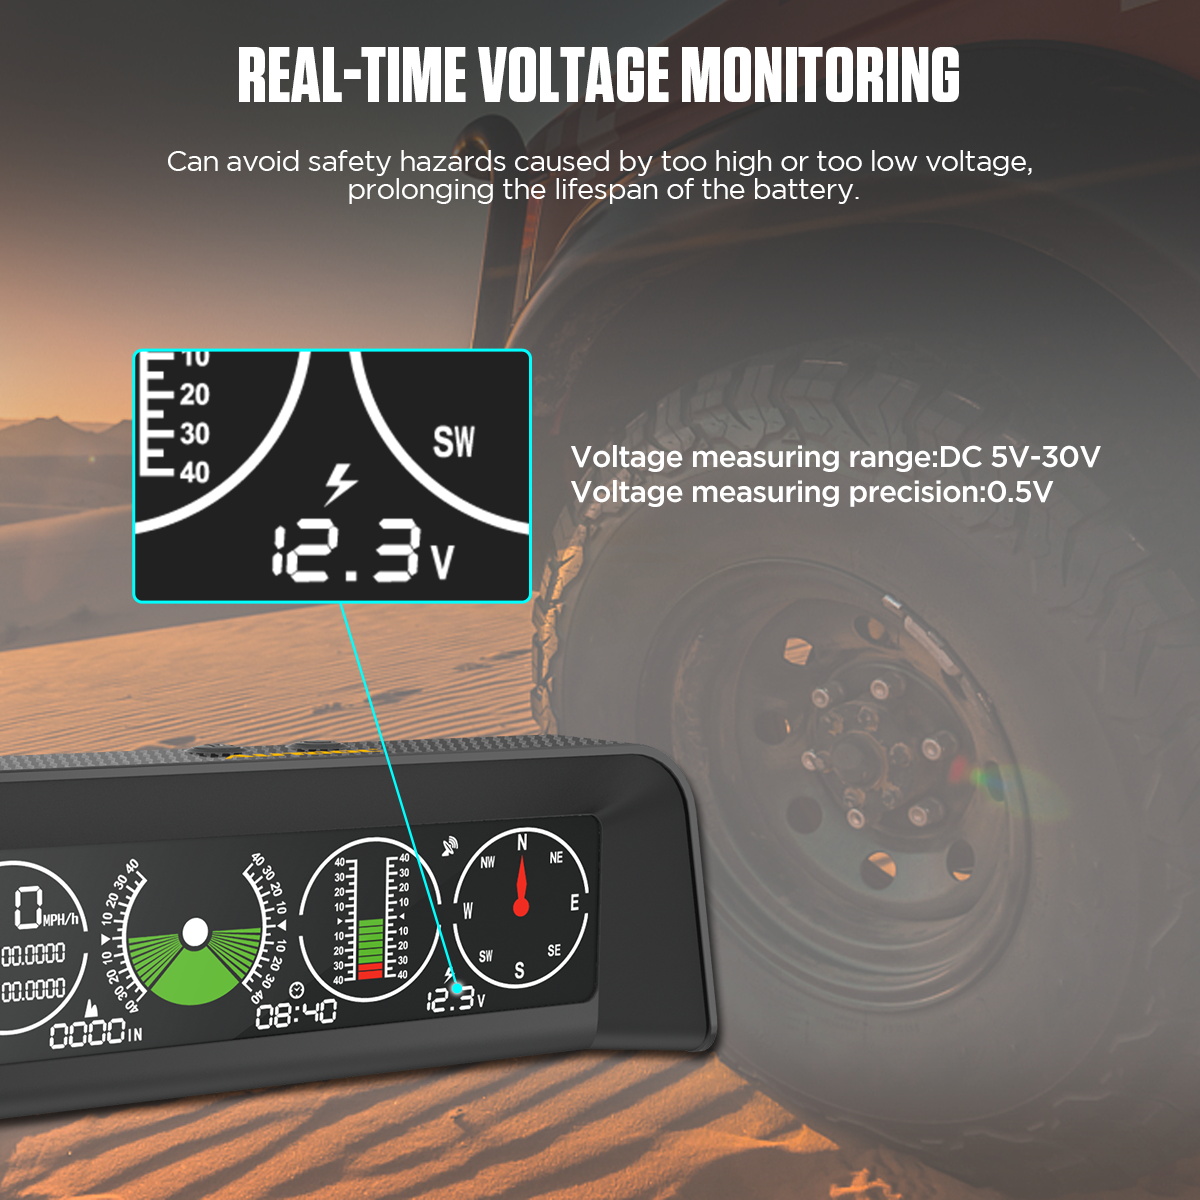 X90 On-Board Computer Display OBD2 Car Speedometer OBD Gauge with Tilt  Pitch Angle Protractor Display 